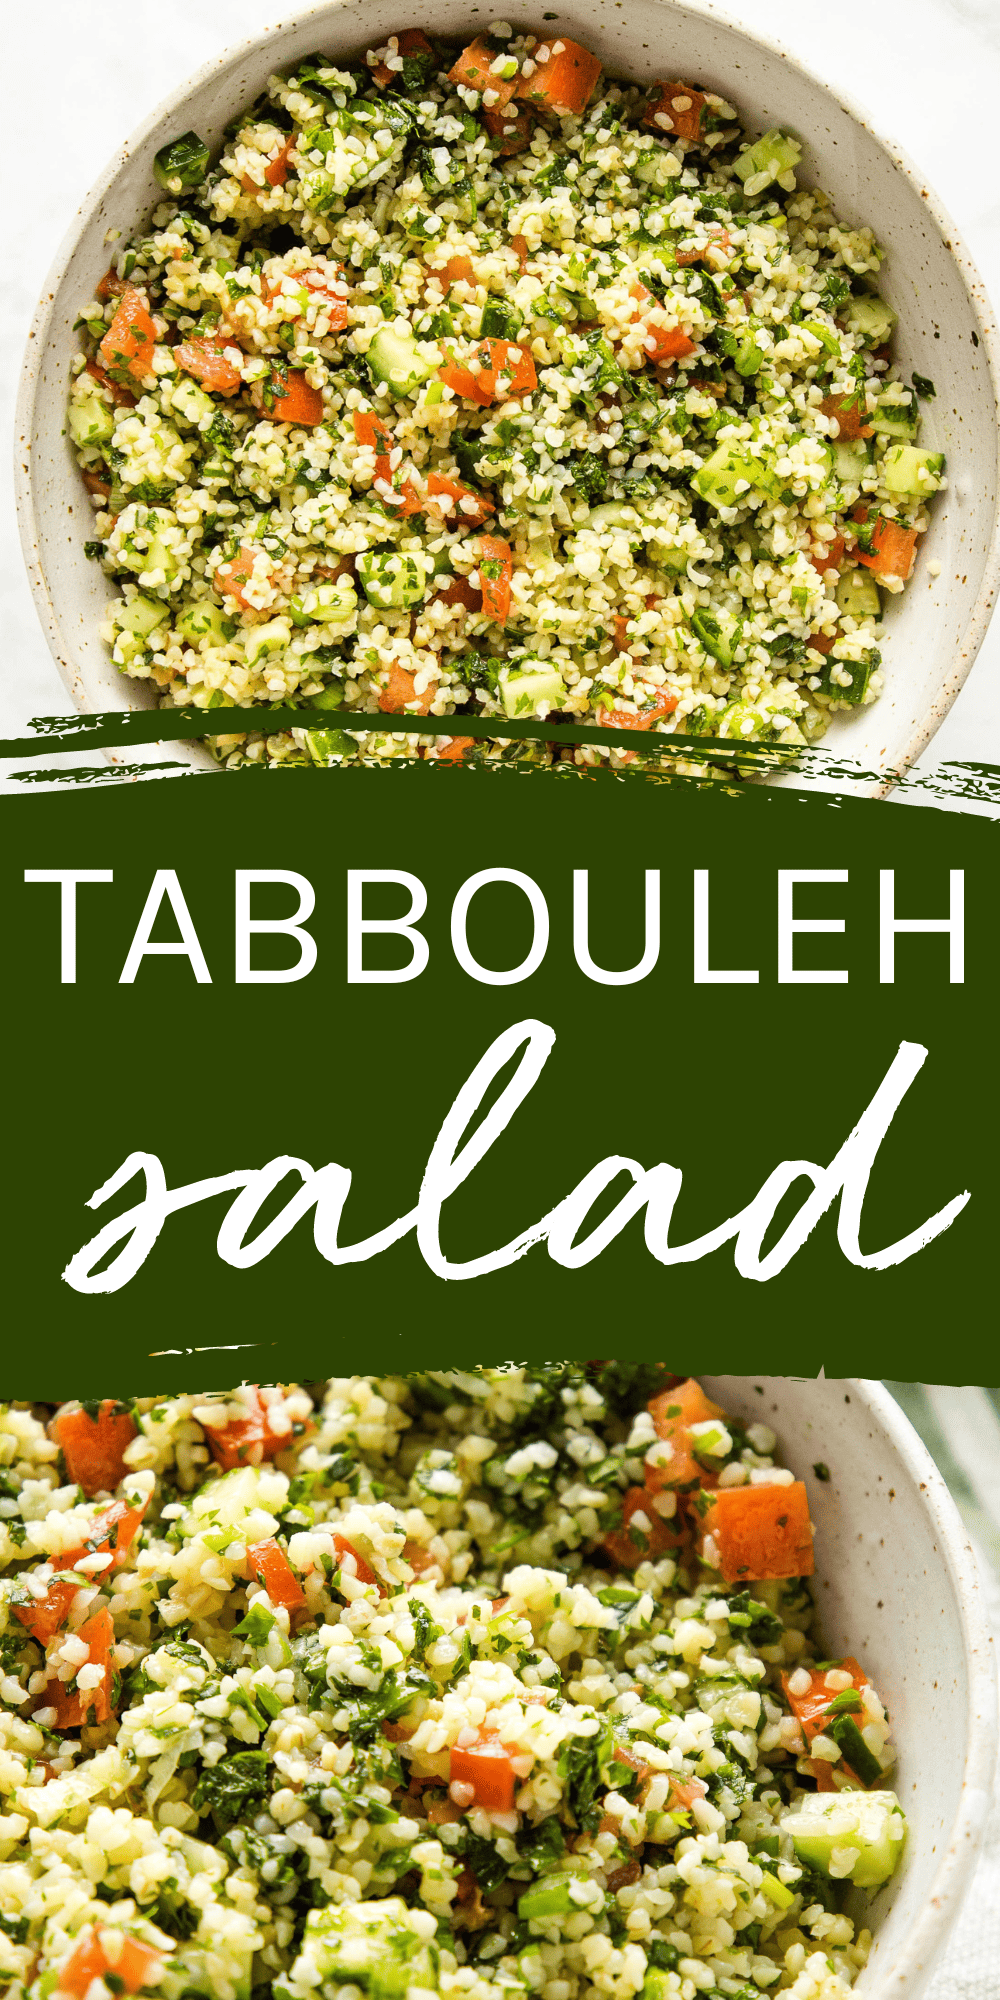 This Tabbouleh Salad recipe (also called Tabouli) is a classic middle-eastern style salad made with finely chopped fresh vegetables, fresh herbs, and bulgur wheat, tossed with a simple dressing made from olive oil, lemon juice, and garlic. It's the ultimate fresh and healthy side dish! Recipe from thebusybaker.ca #tabbouleh #tabouli #salad #tabboulehsalad #taboulisalad #healthysalad #mediterraeandiet #mediterraneanrecipe #saladrecipe #easysalad #mealprep #mealplanning via @busybakerblog